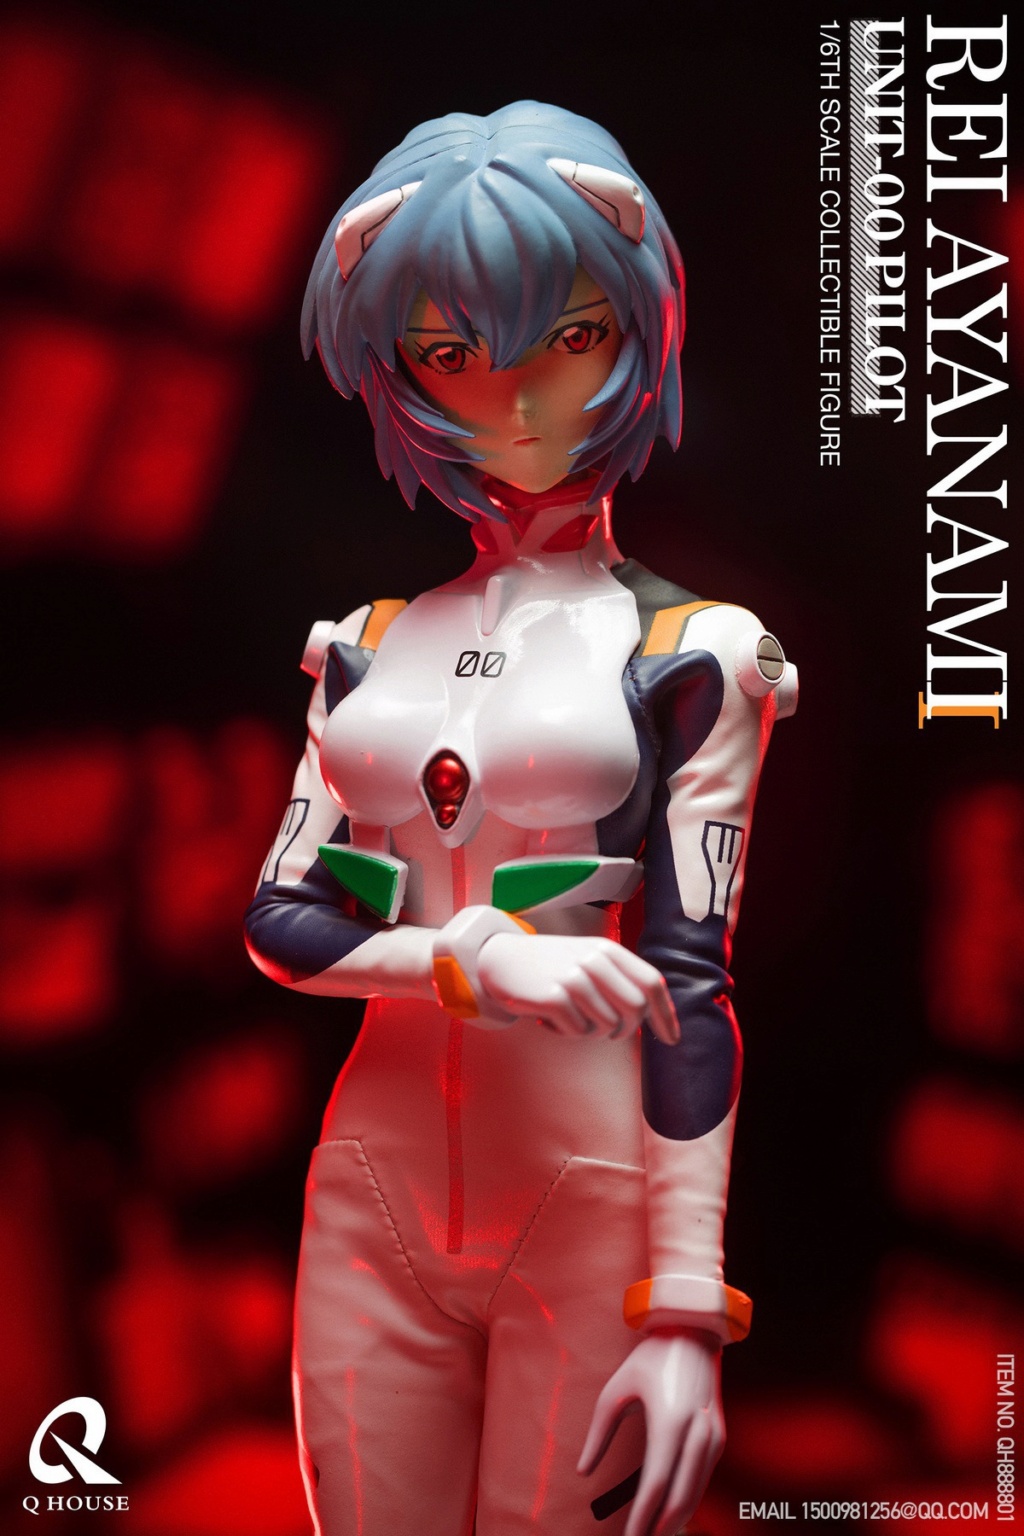 NEW PRODUCT: Q House: 1/6 Evangelion - Rei Ayanami  11142810